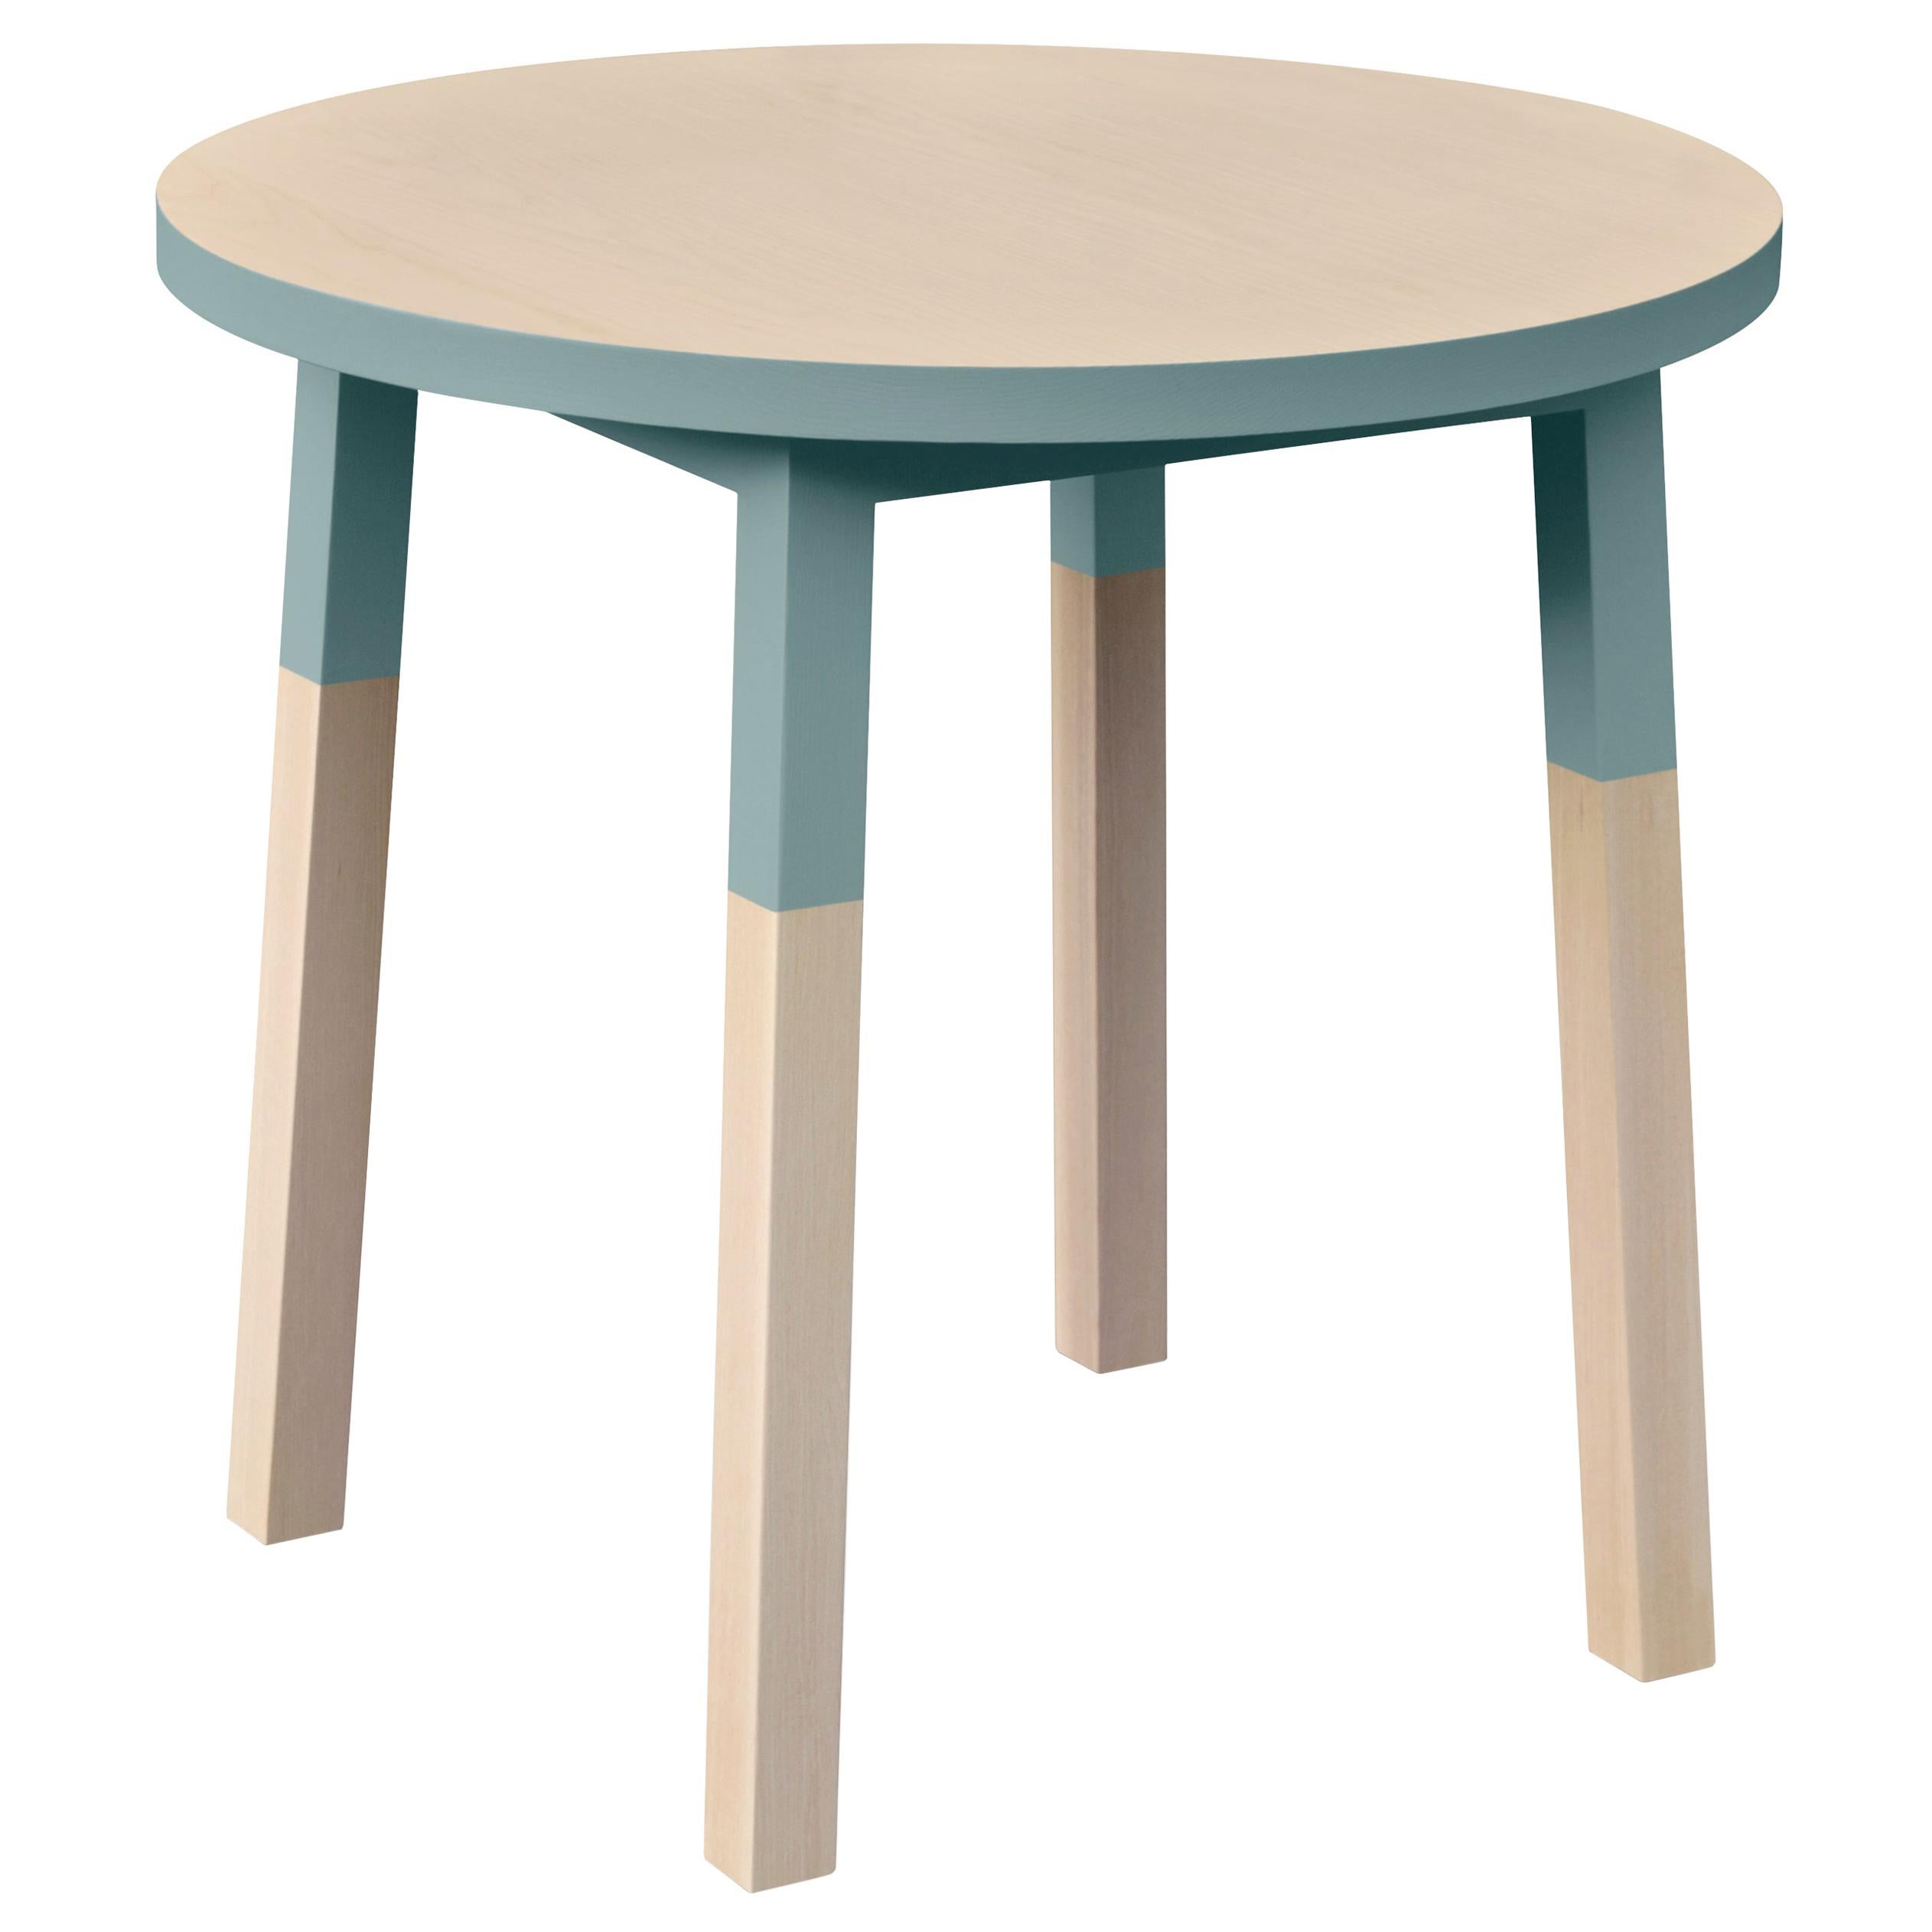 Round Table, South Scandinavian Design by Eric Gizard, 100% Made in France